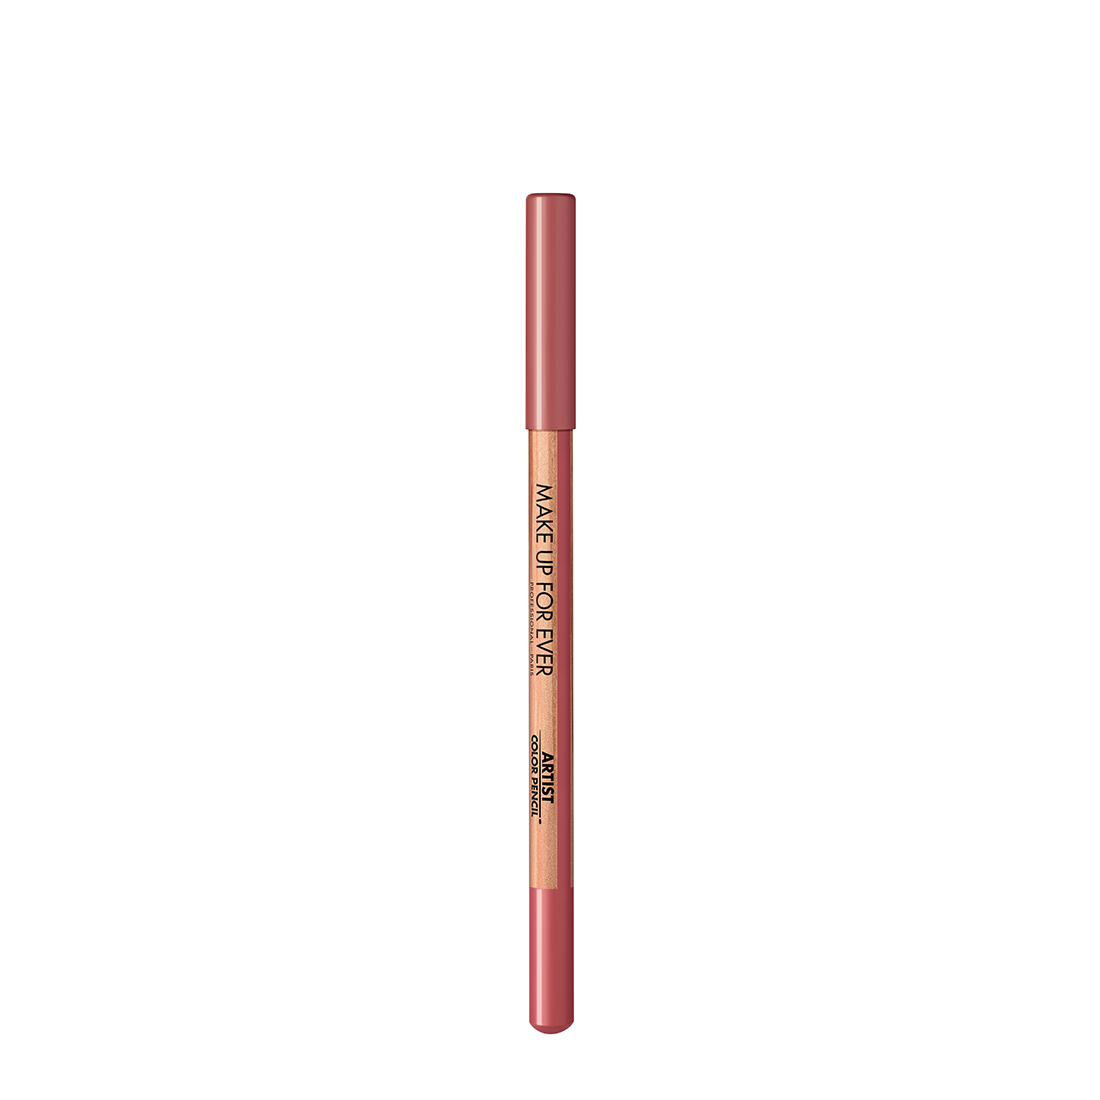 MAKE UP FOR EVER ARTIST COLOR PENCIL 1,41G 808 BOUNDLESS BERRY